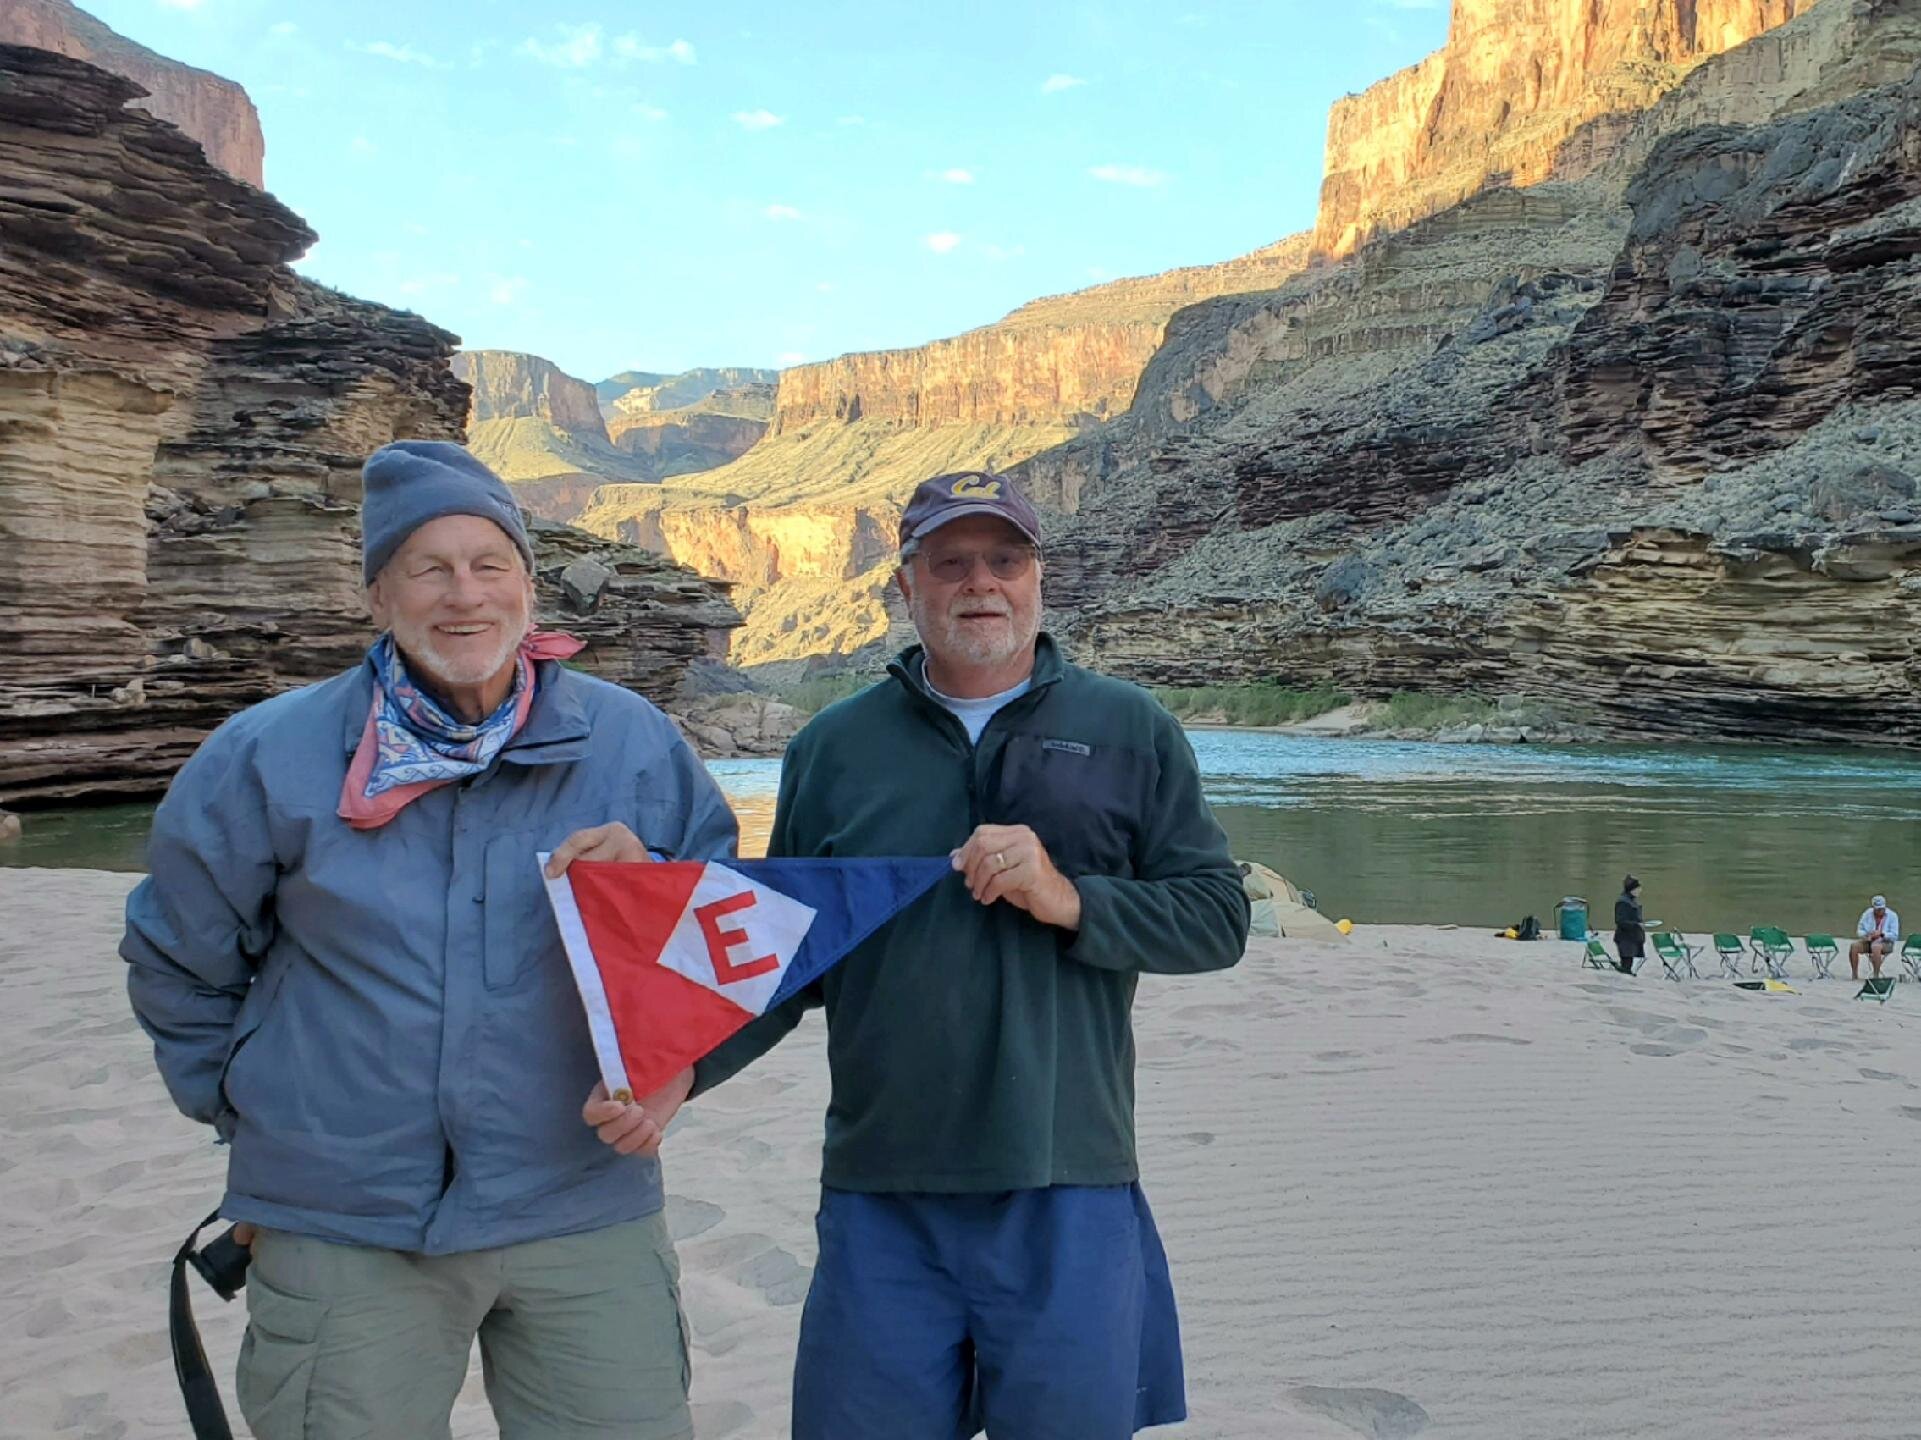  Scott and Murray proudly show their colors on the banks of the Colorado River 